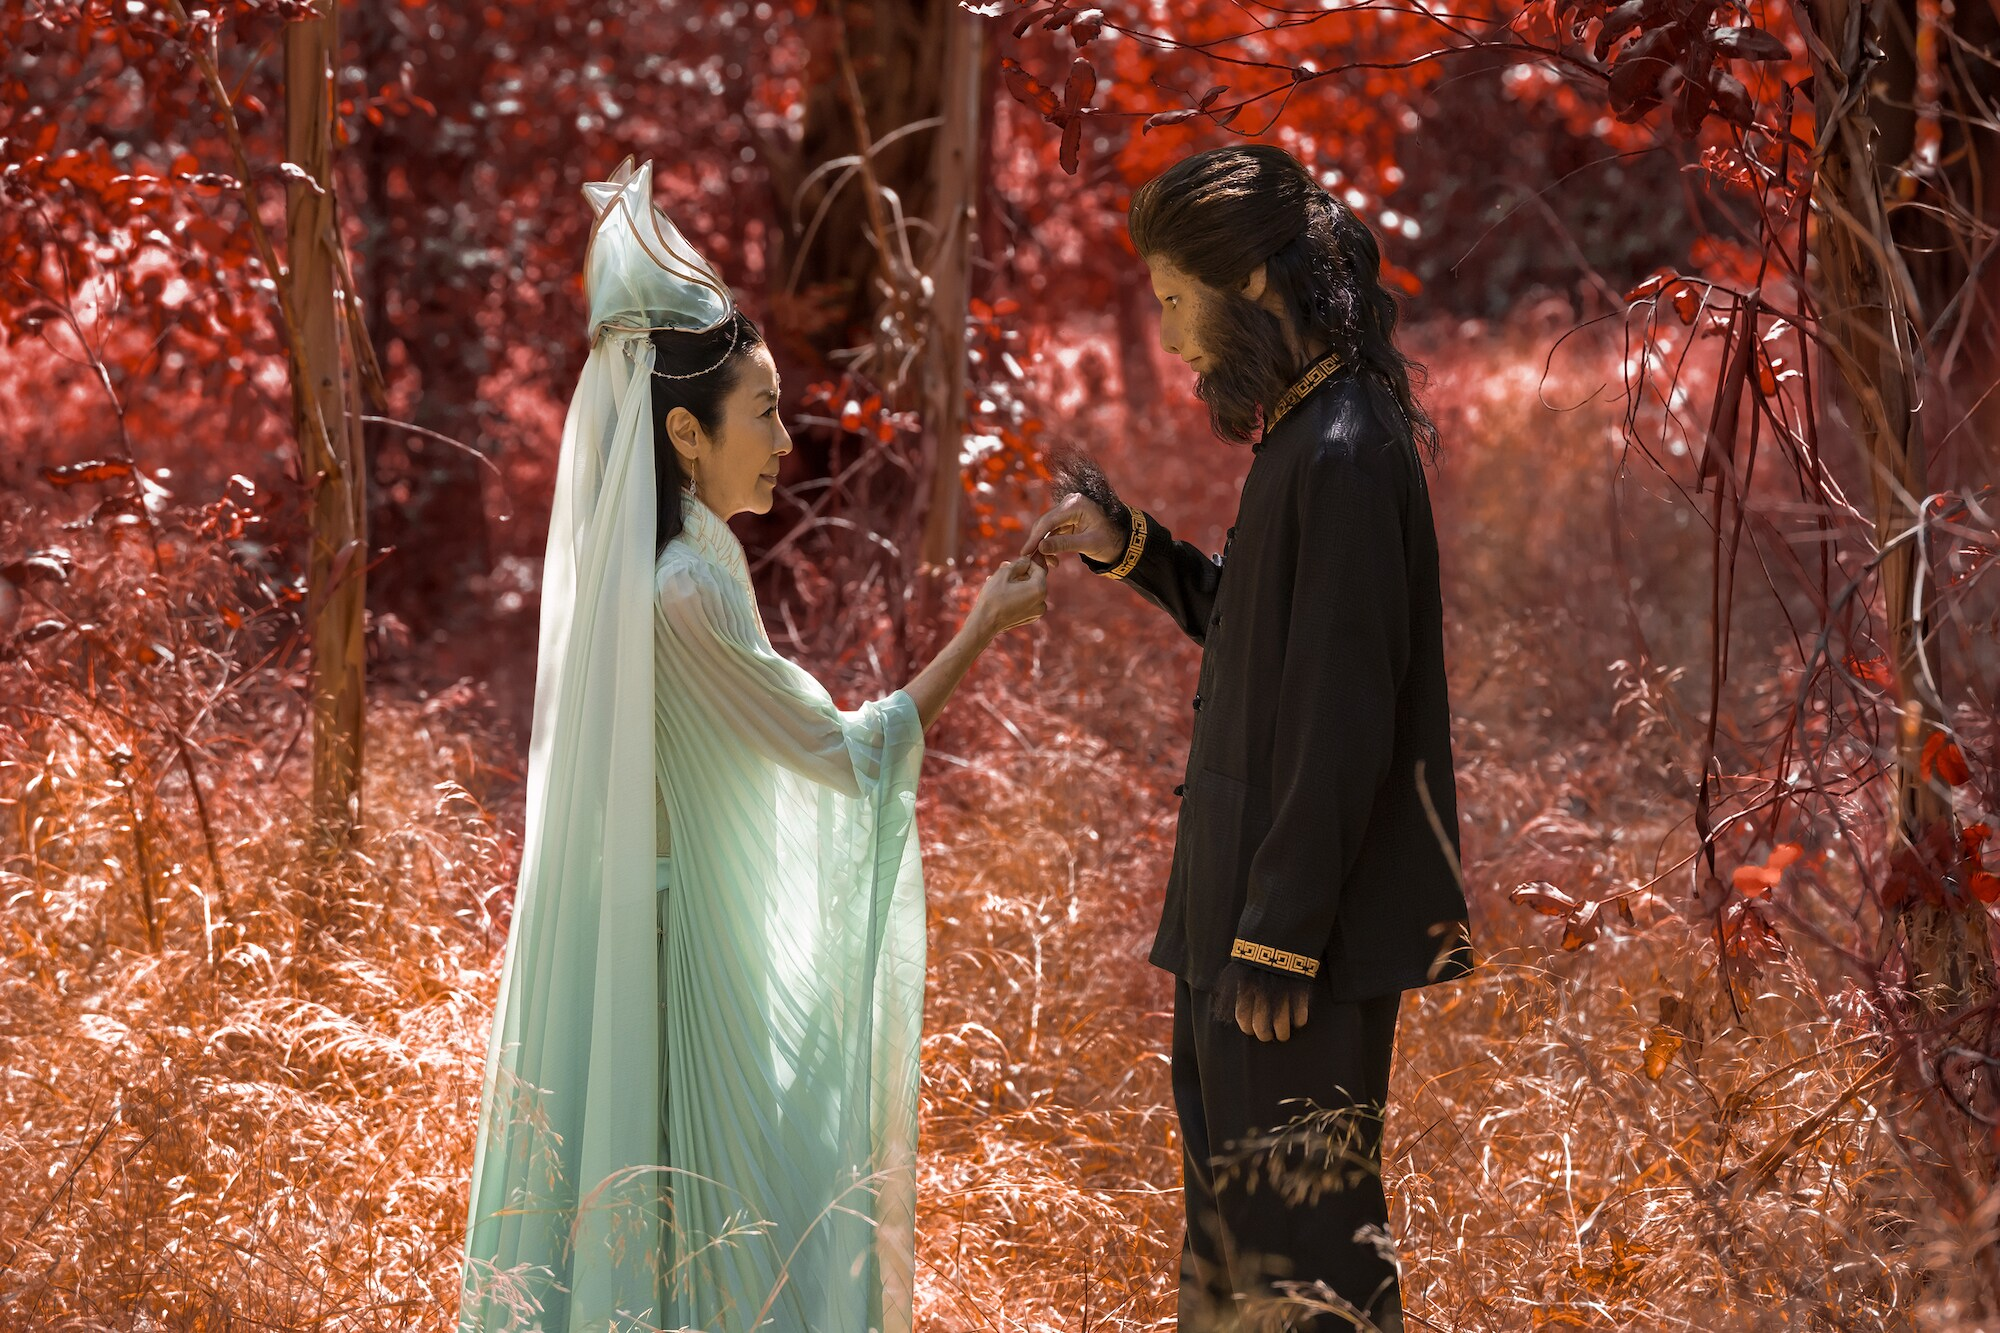 A woman in a white dress and headdress touches hands with a monkey-like human in a dark outfit with gold collar and cuffs. They are standing in a woodland with rich red lighting on its foliage.